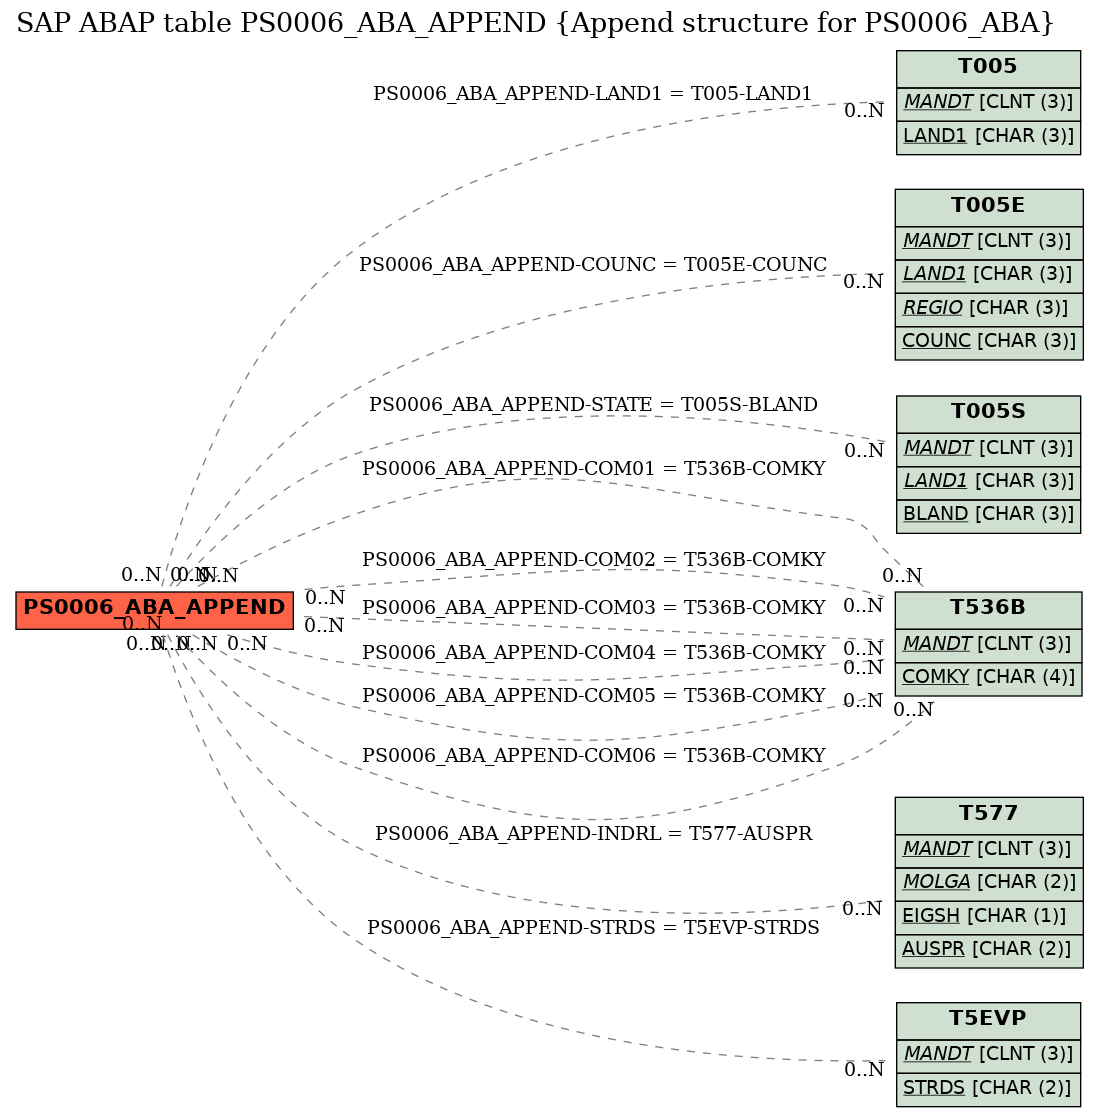 E-R Diagram for table PS0006_ABA_APPEND (Append structure for PS0006_ABA)